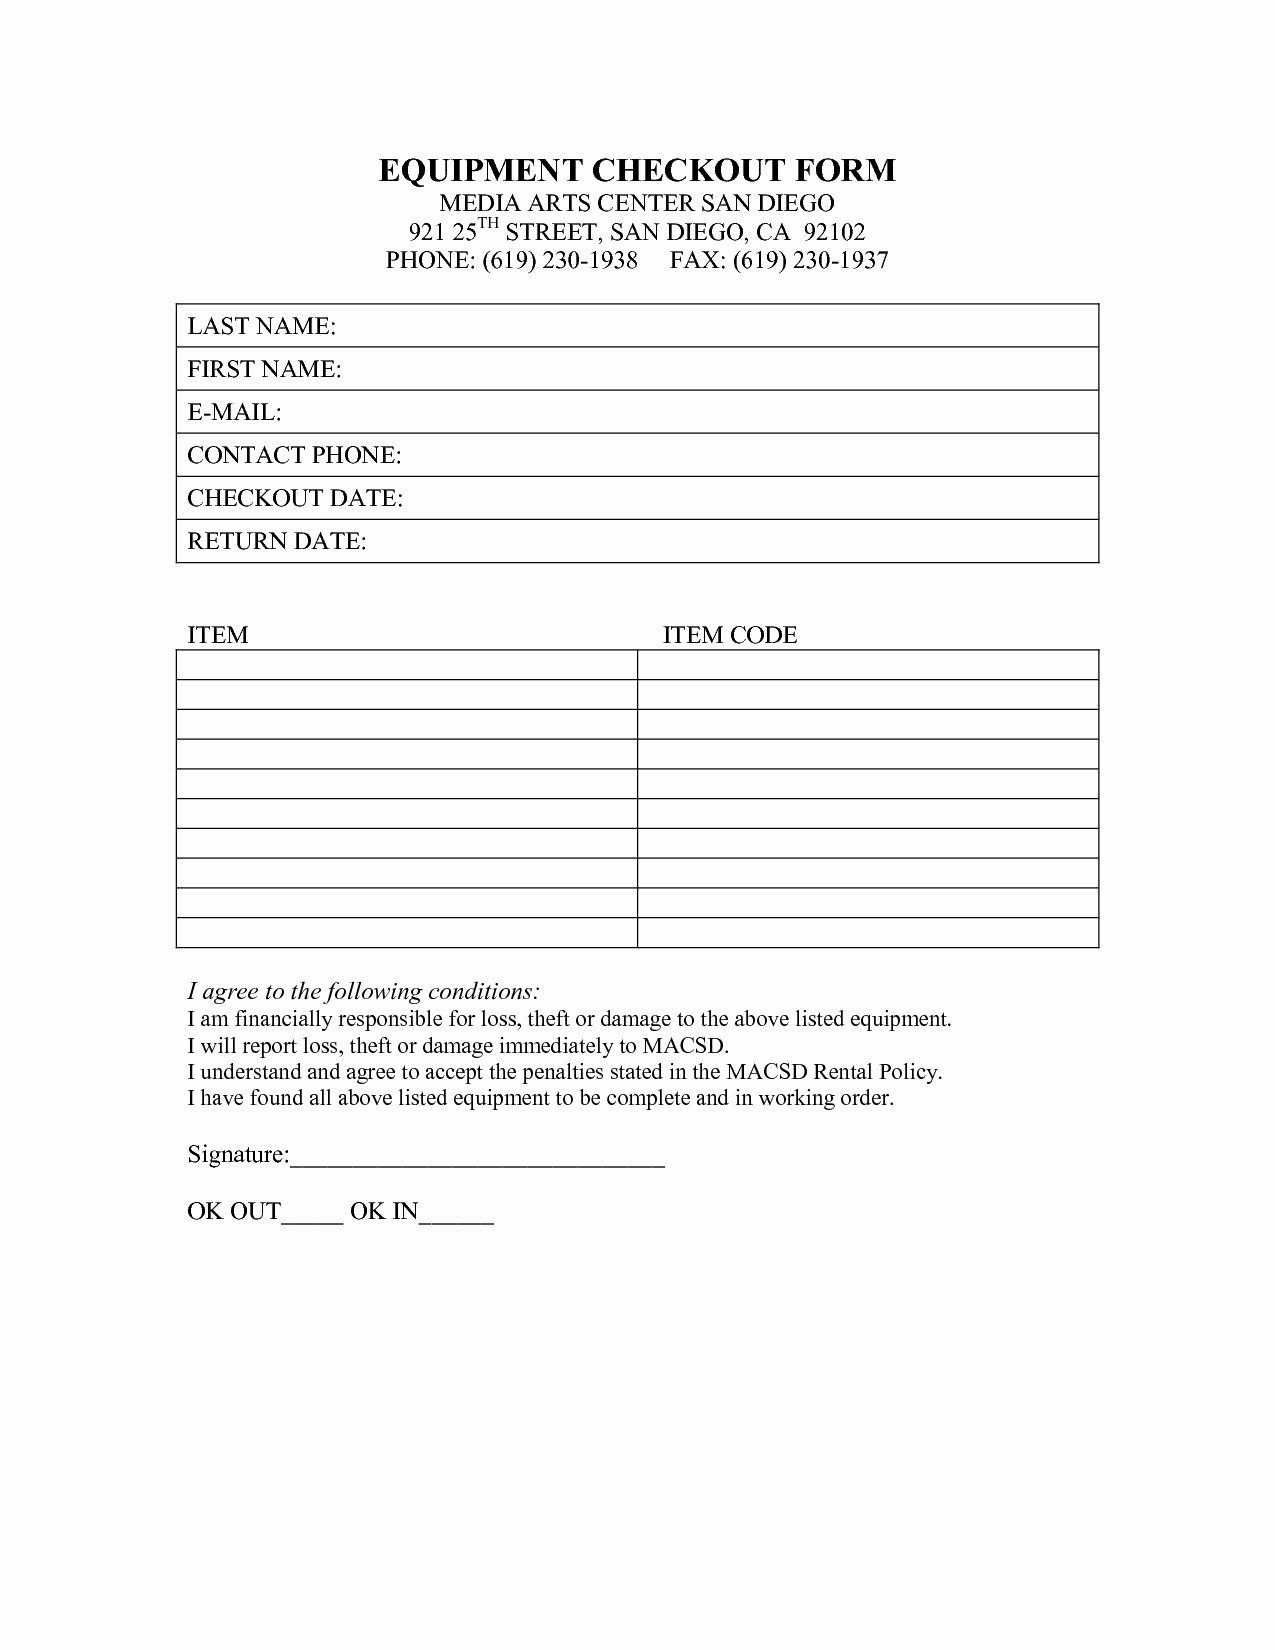 Equipment Checkout form Template Best Of Best S Of Check Out form Template Jail Equipment